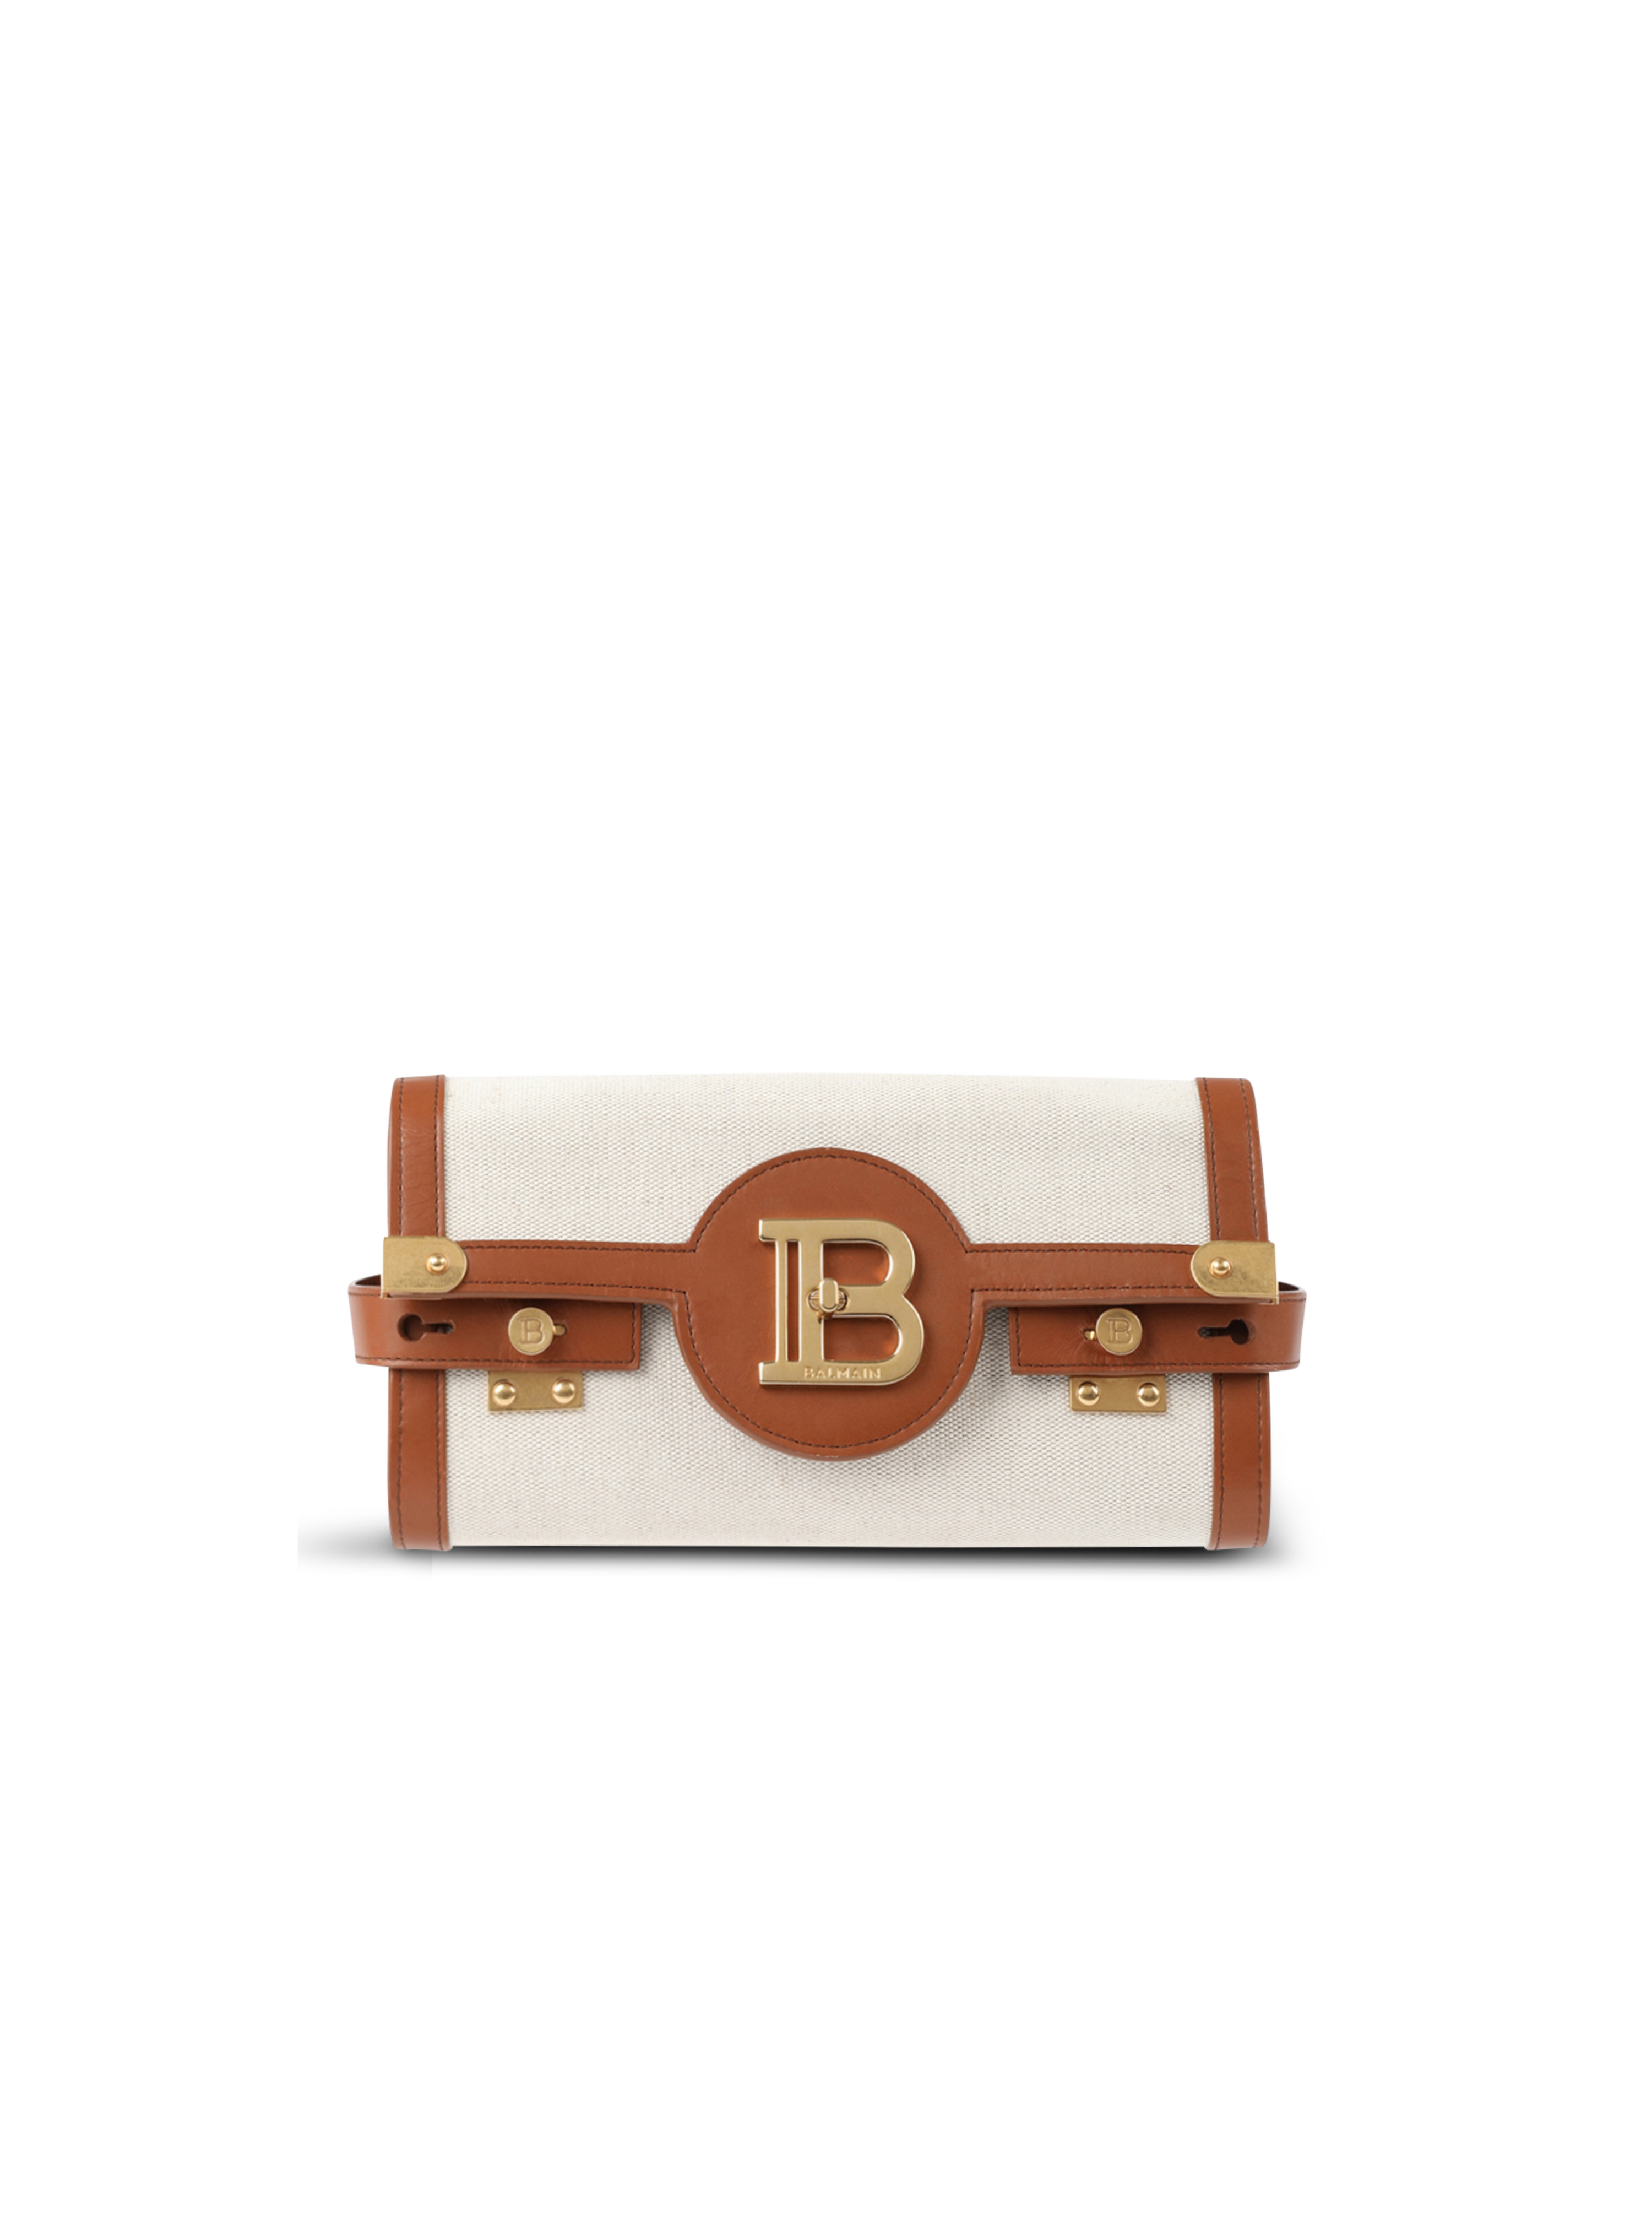 Ecru canvas B-Buzz 23 clutch with brown leather panels, beige